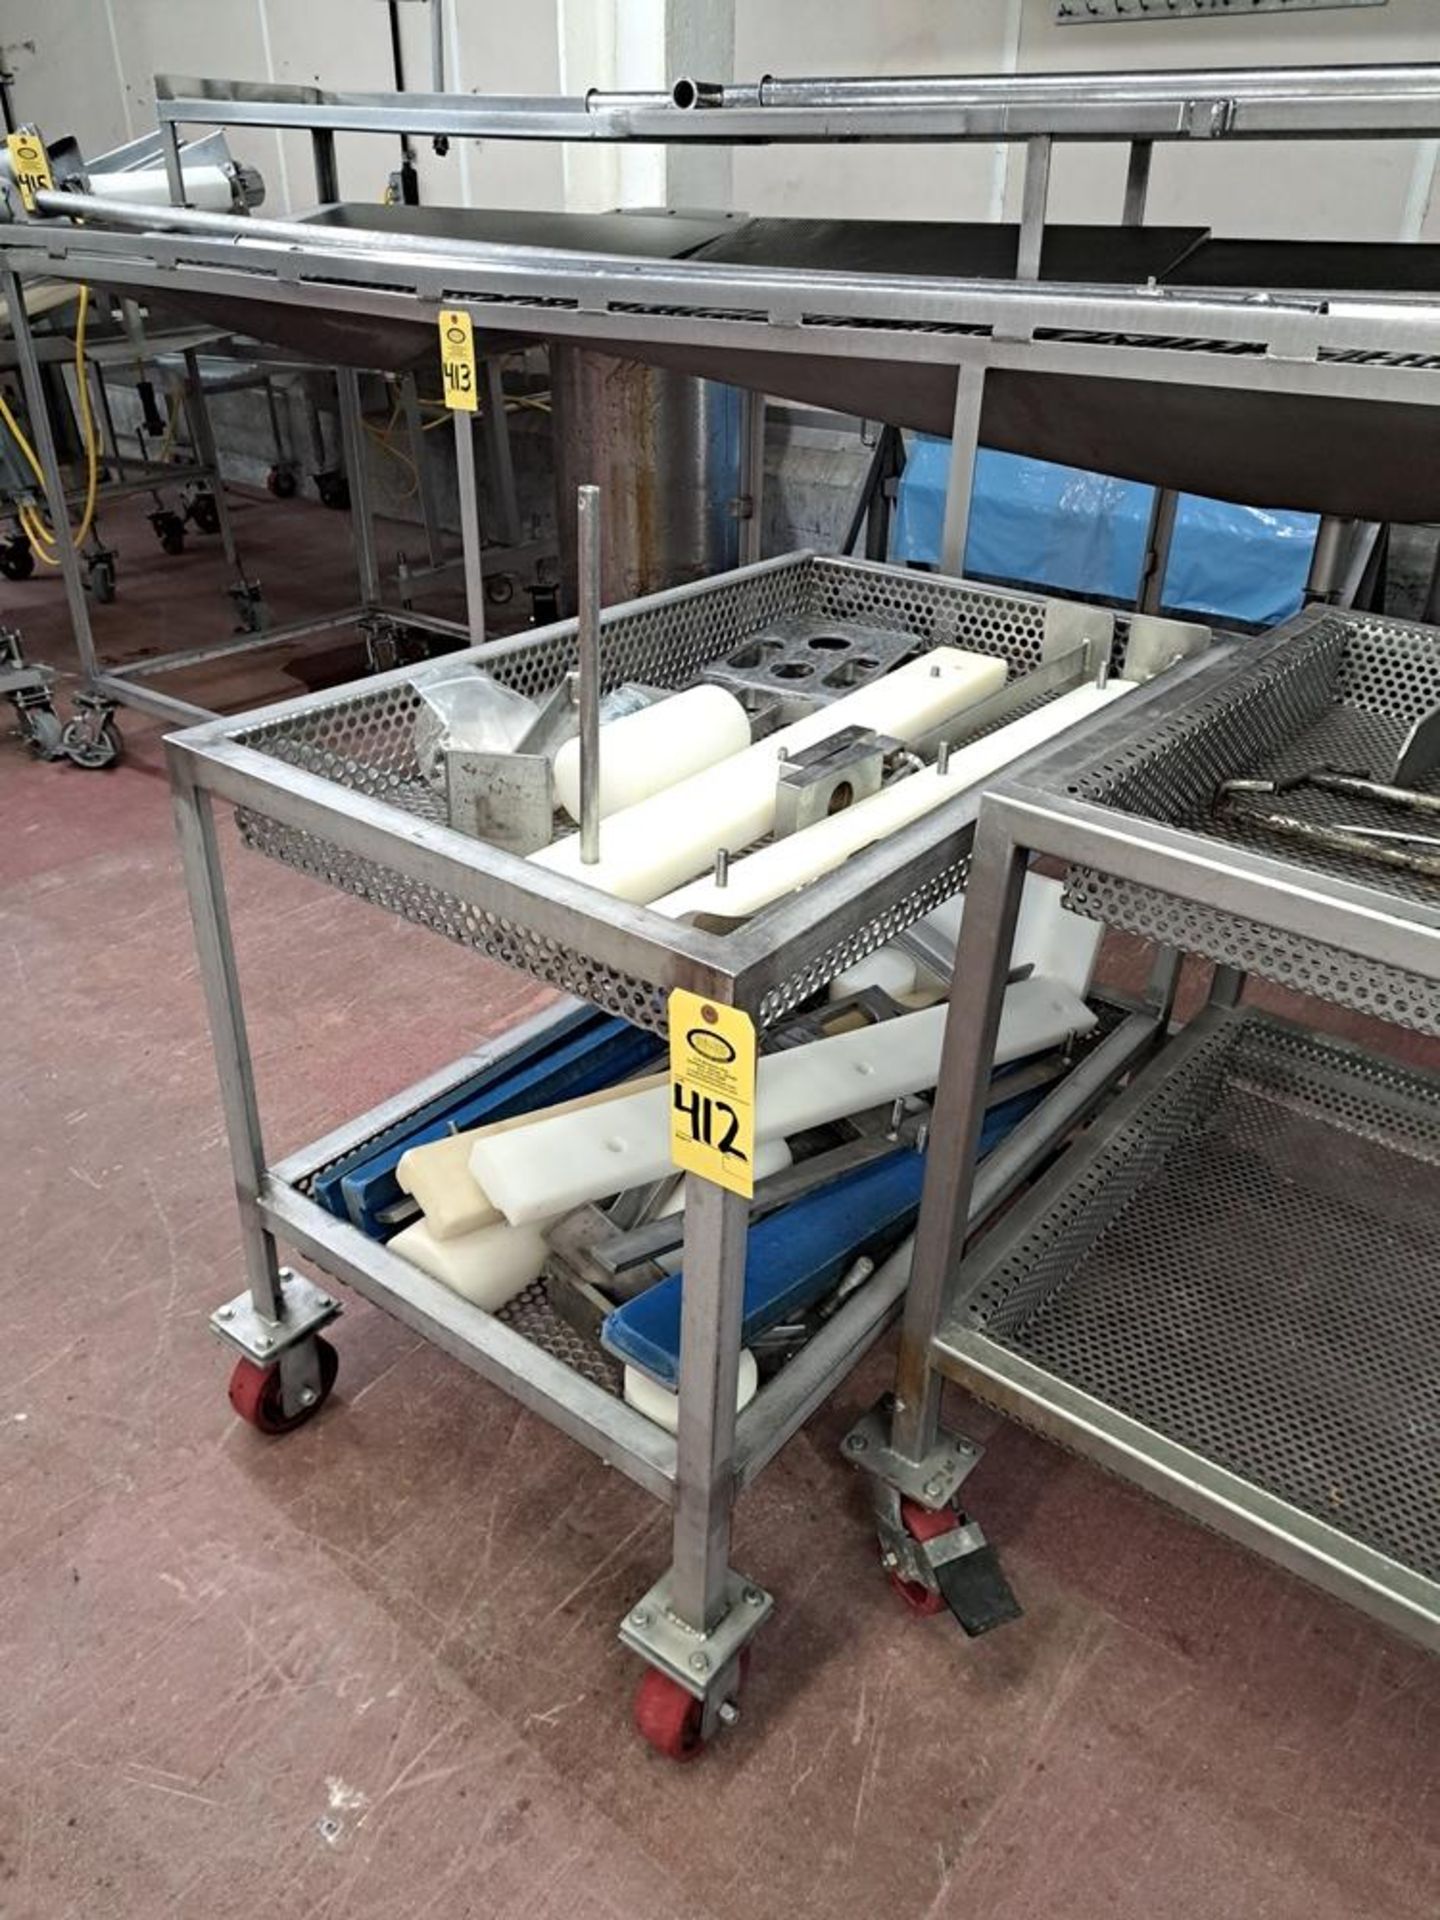 Stainless Steel Parts Cart, 26" W X 36" L: Required Loading Fee $50.00, Rigger-Norm Pavlish,